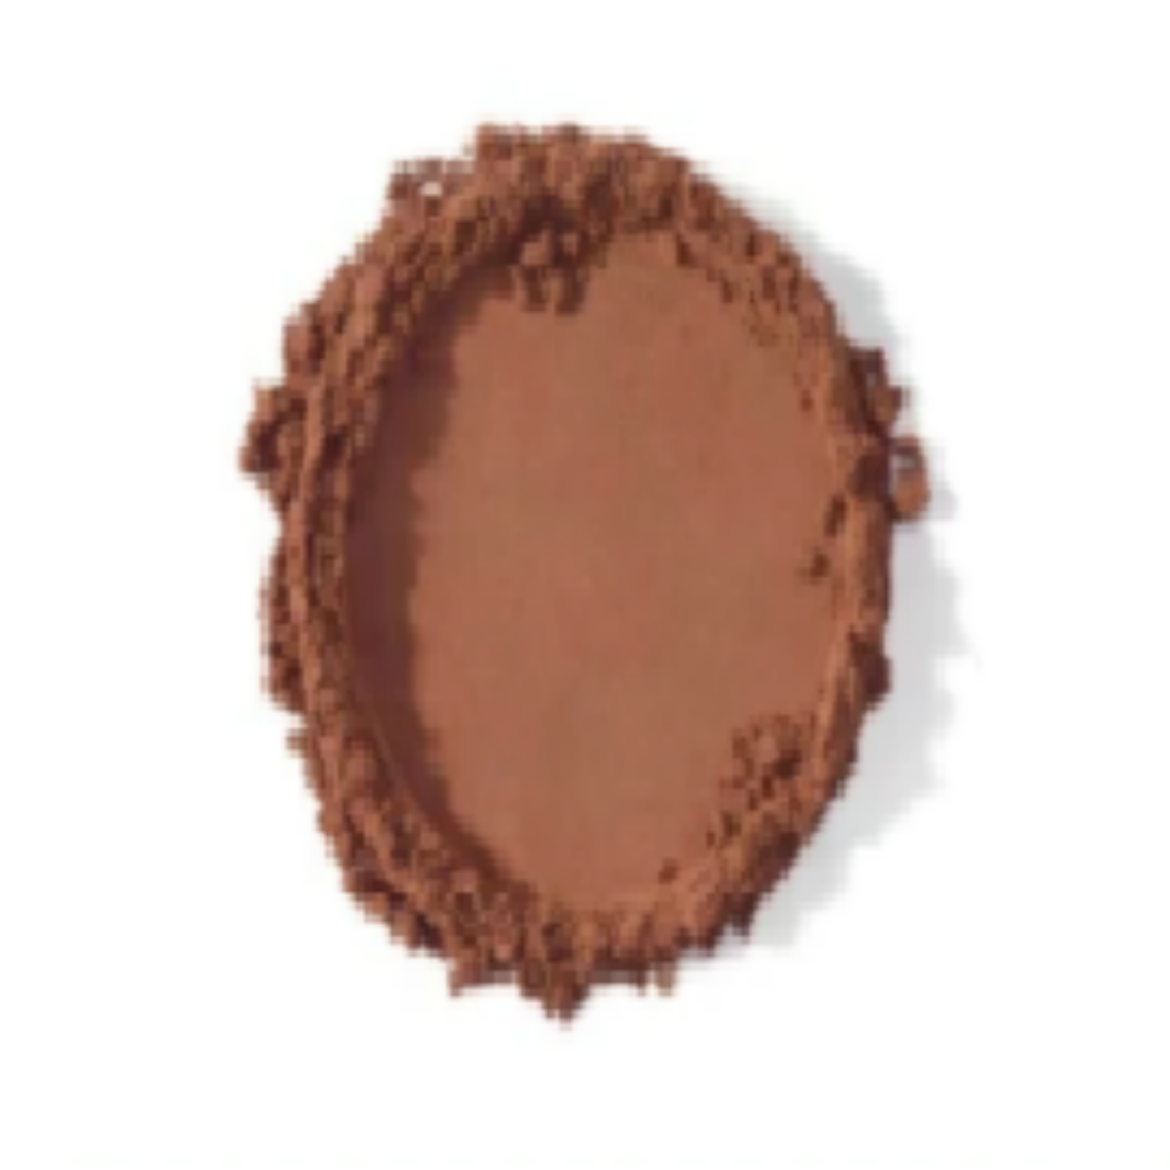 Picture of 1KG 350-DP11 LIGHT COCOA POWDER (10-12% FAT)